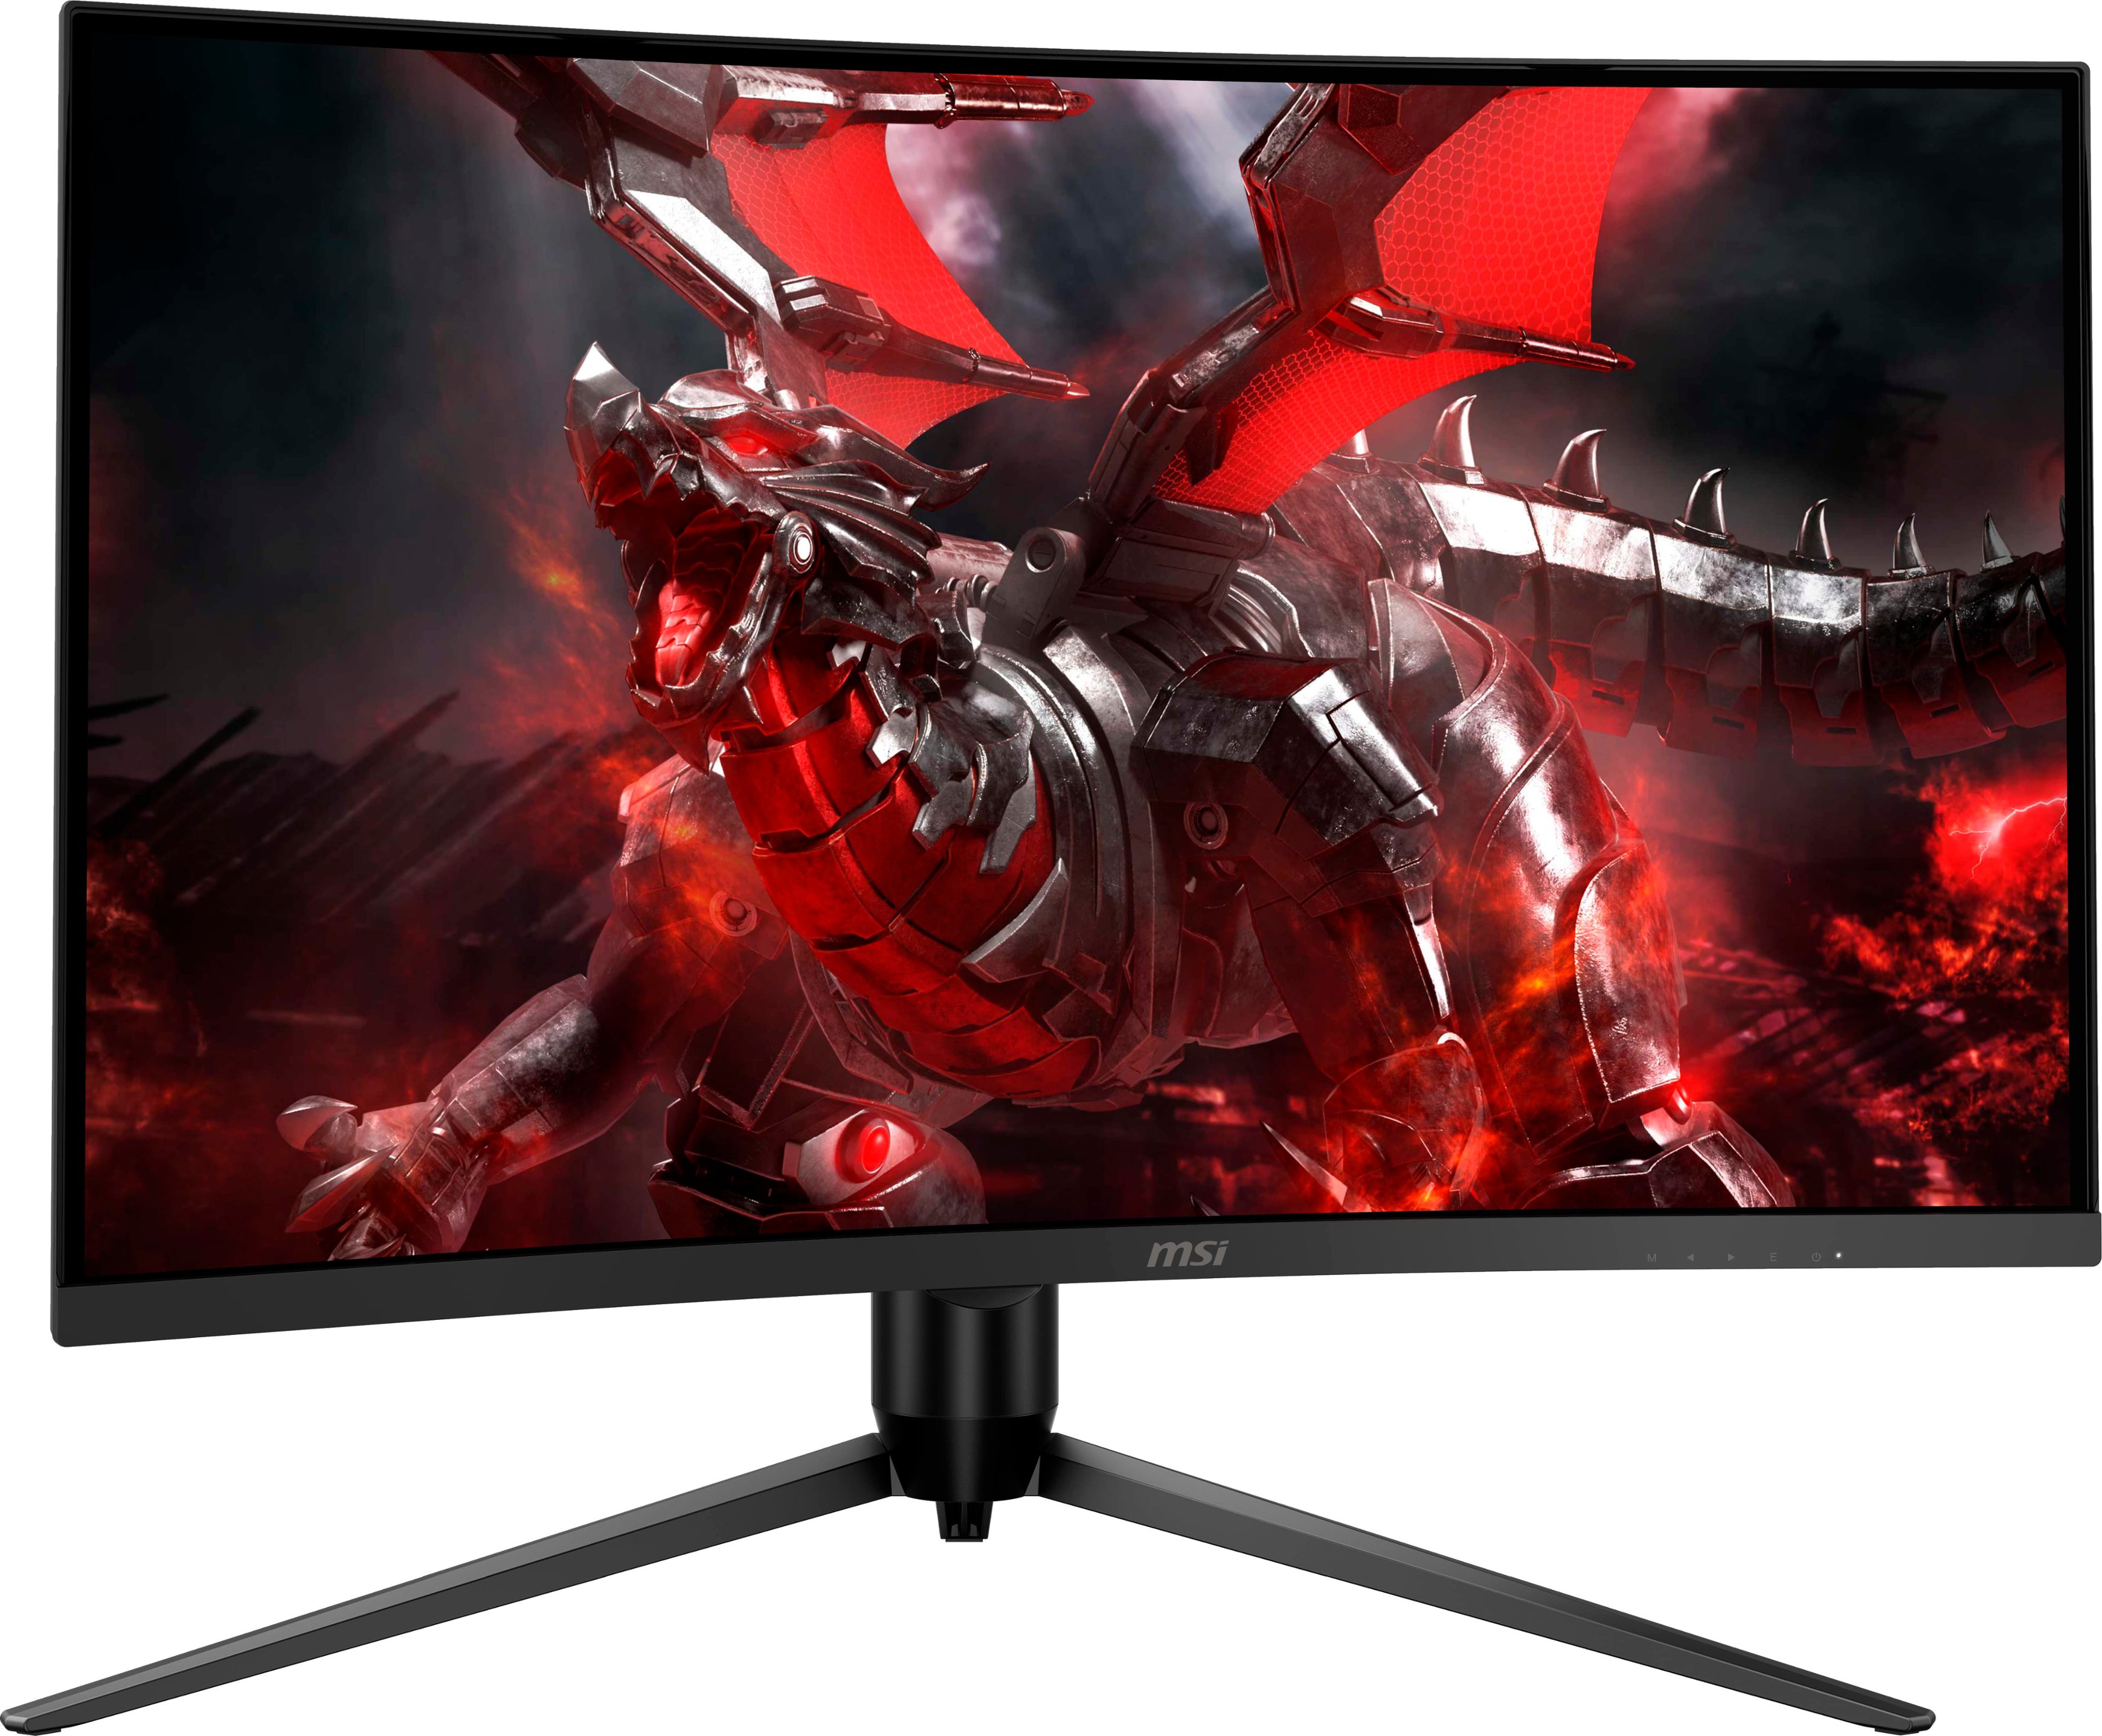 Angle View: MSI - Optix 27" LED Curved FHD FreeSync Monitor with Height, Tilt, Swivel (DisplayPort, HDMI) - Black